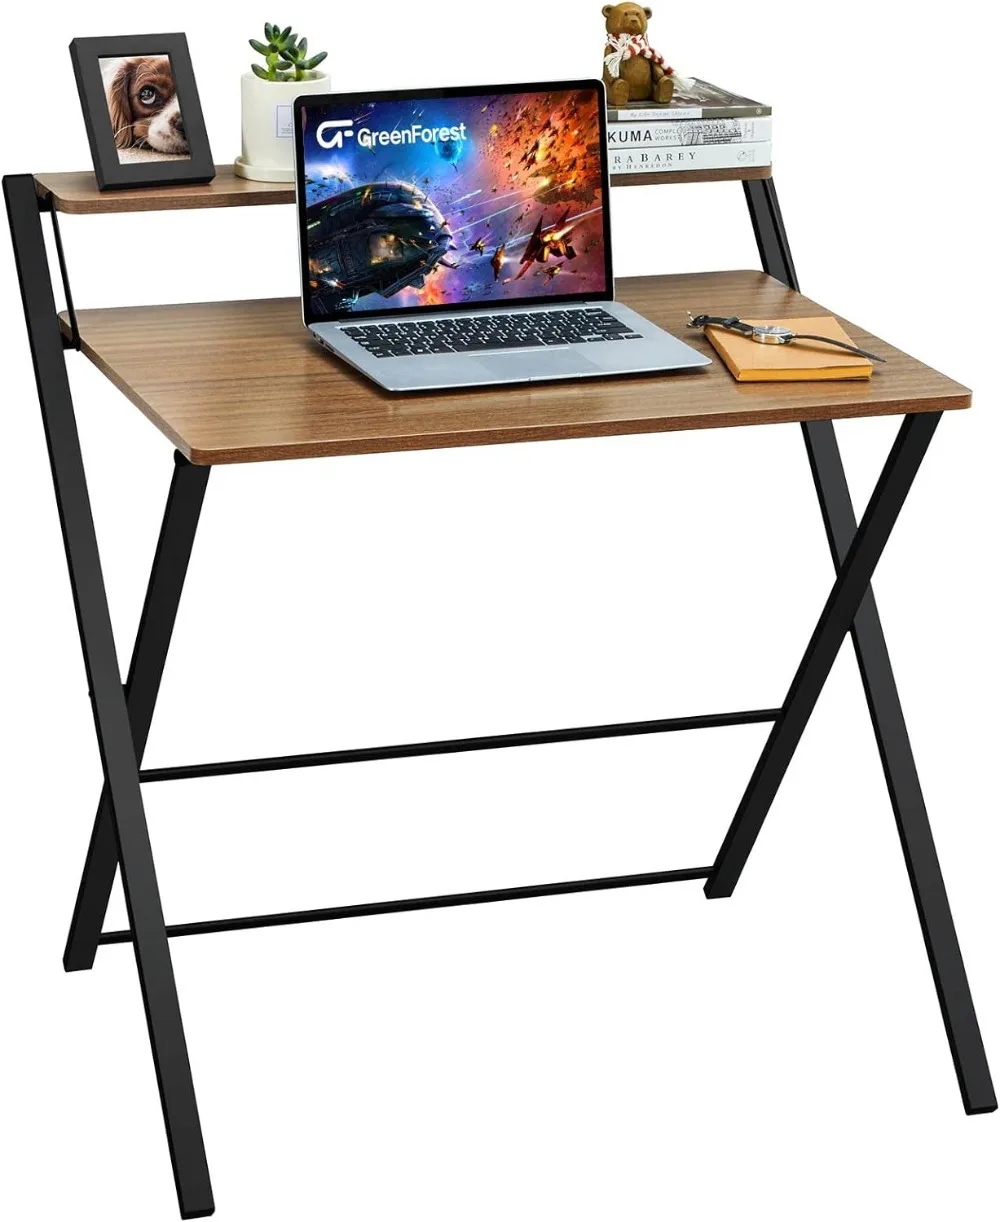 GreenForest Small Folding Desk No Assembly Required, Fully Unfold 27.3 x 22 inch 2-Tier Computer Desk